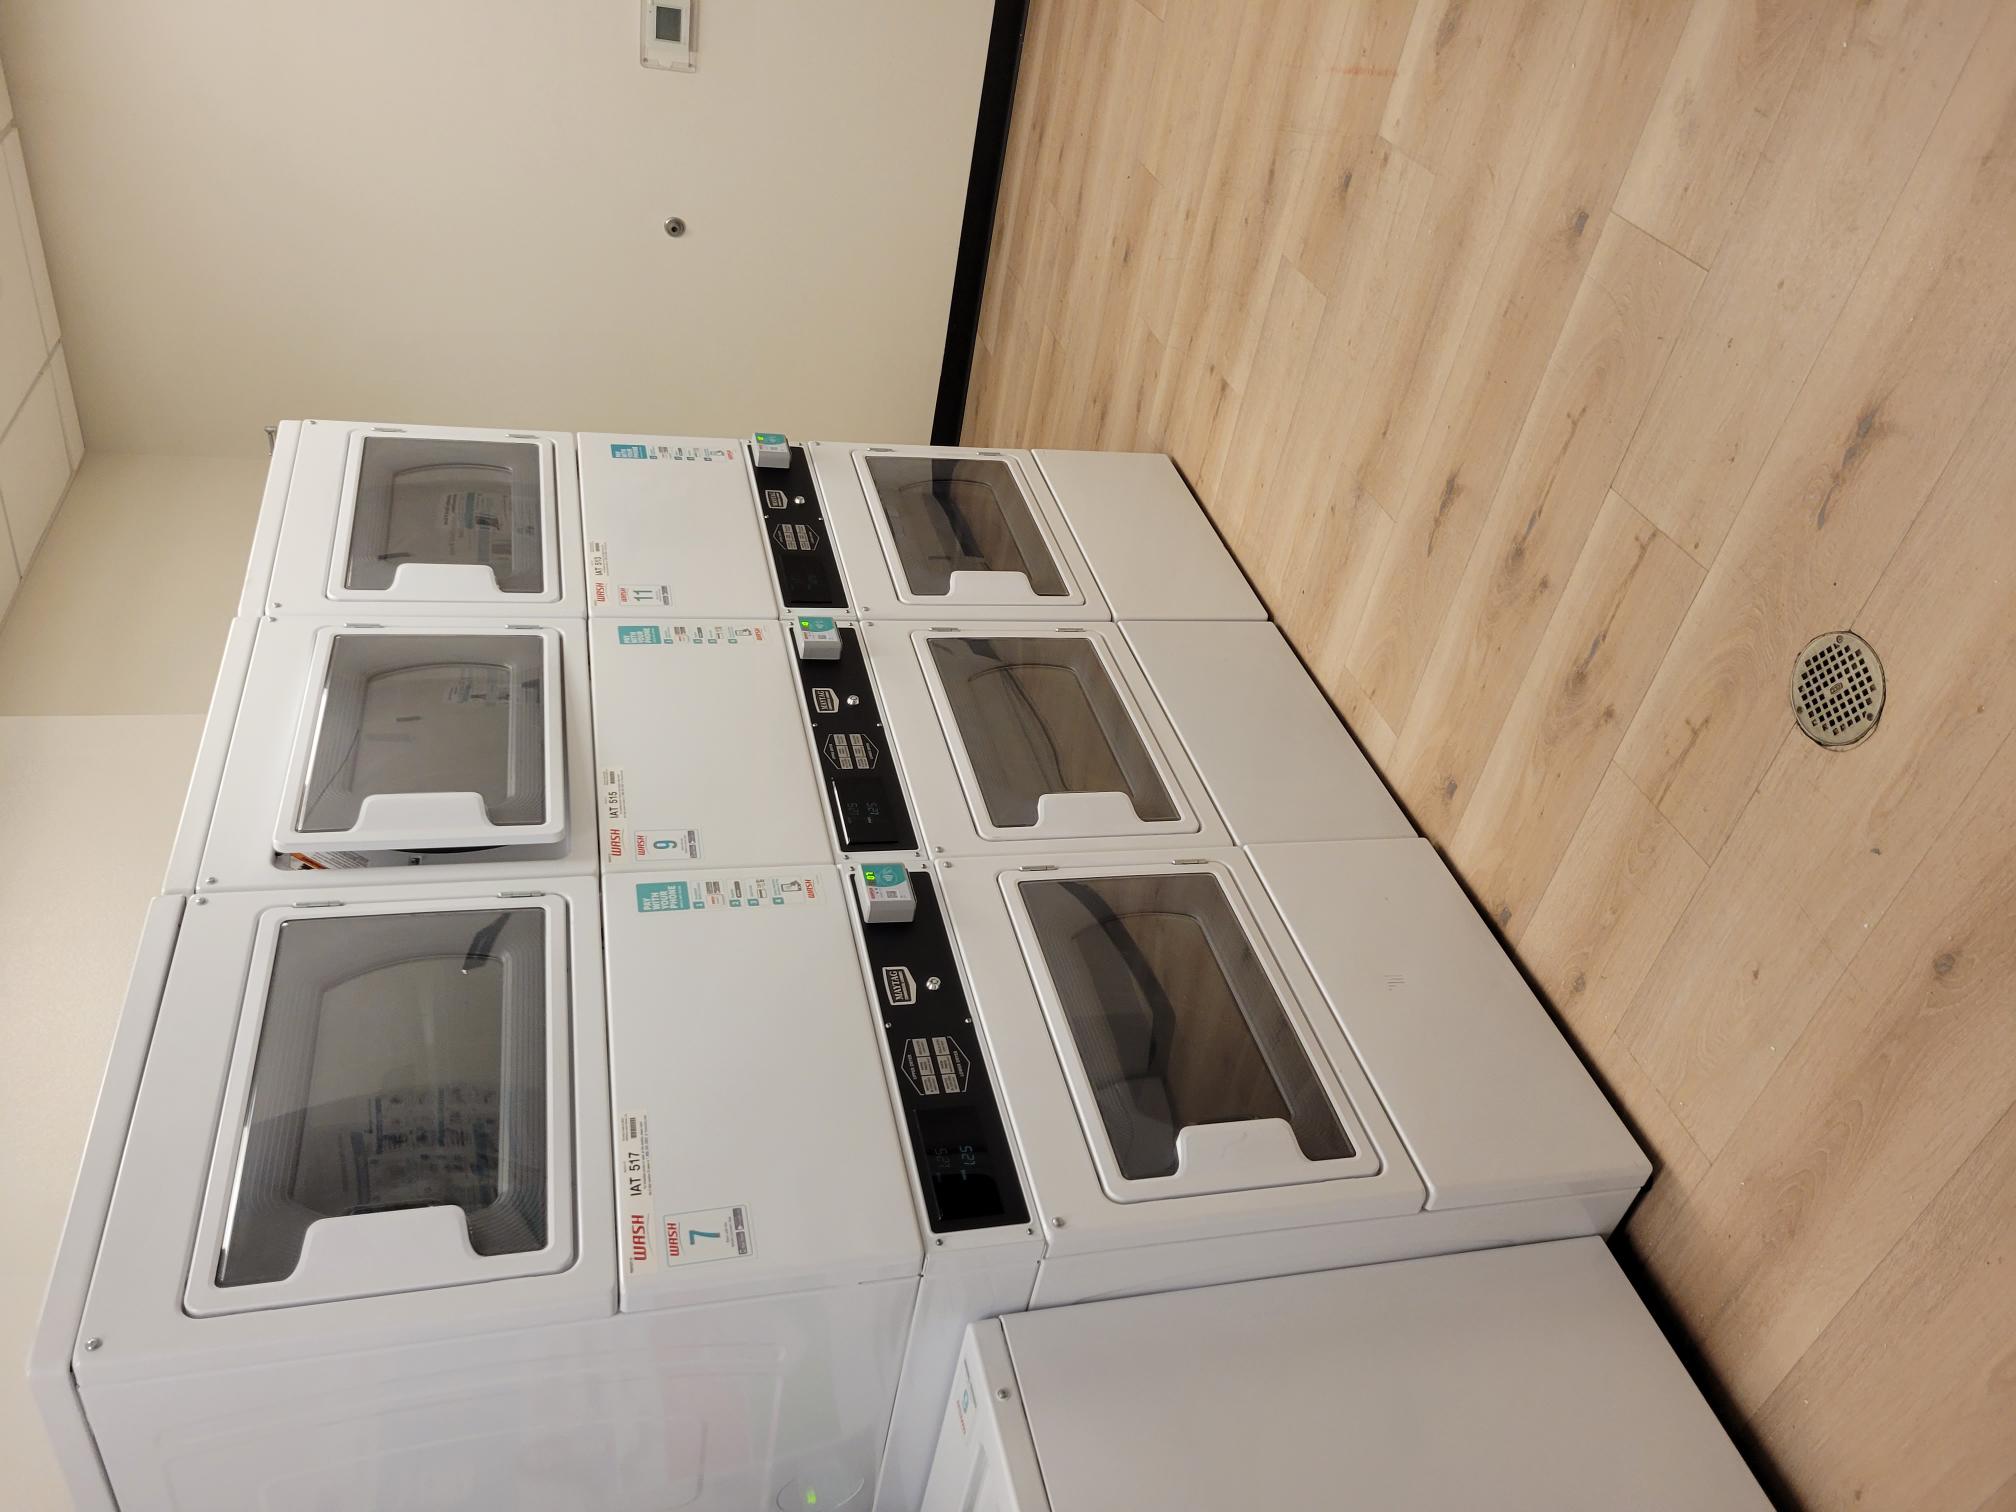 Image of 6 dryers in laundry room.